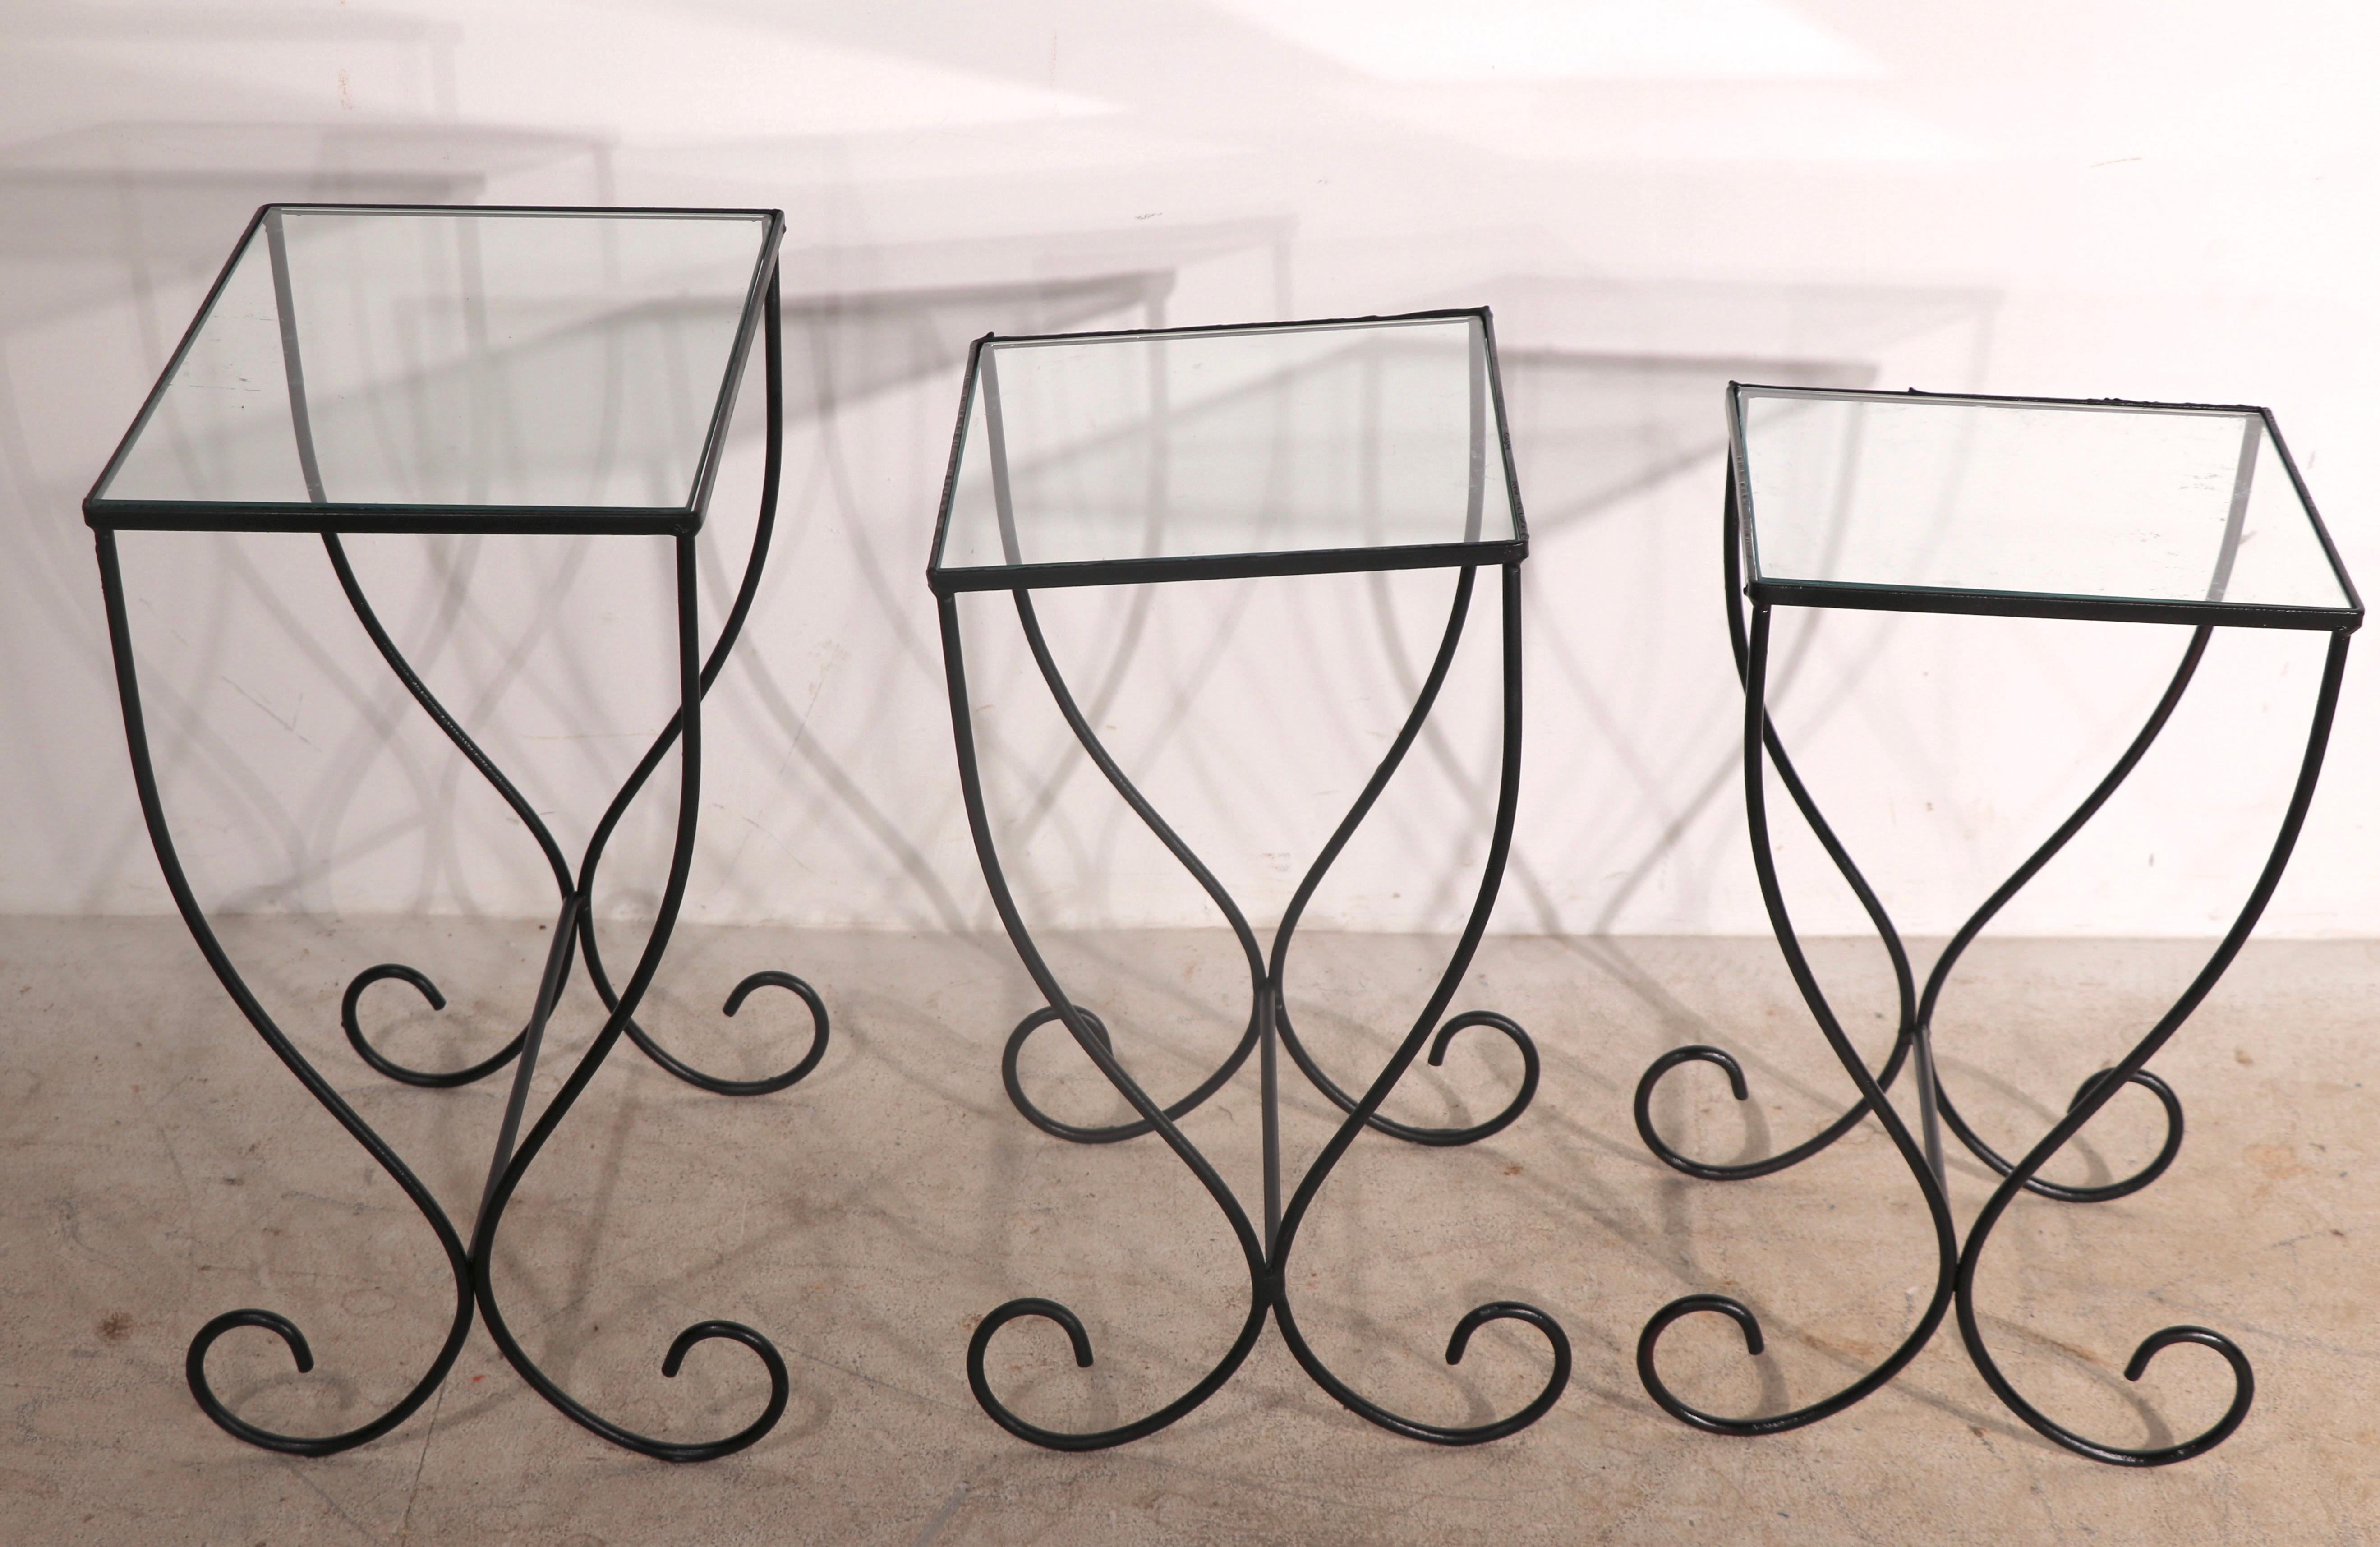 Unusual set of three wrought iron and glass nesting tables, having curlicue scroll legs, wrought iron frames with glass tops. The three graduated tables nest into the larger table. We believe these are American made Mid 20th C. The tables are